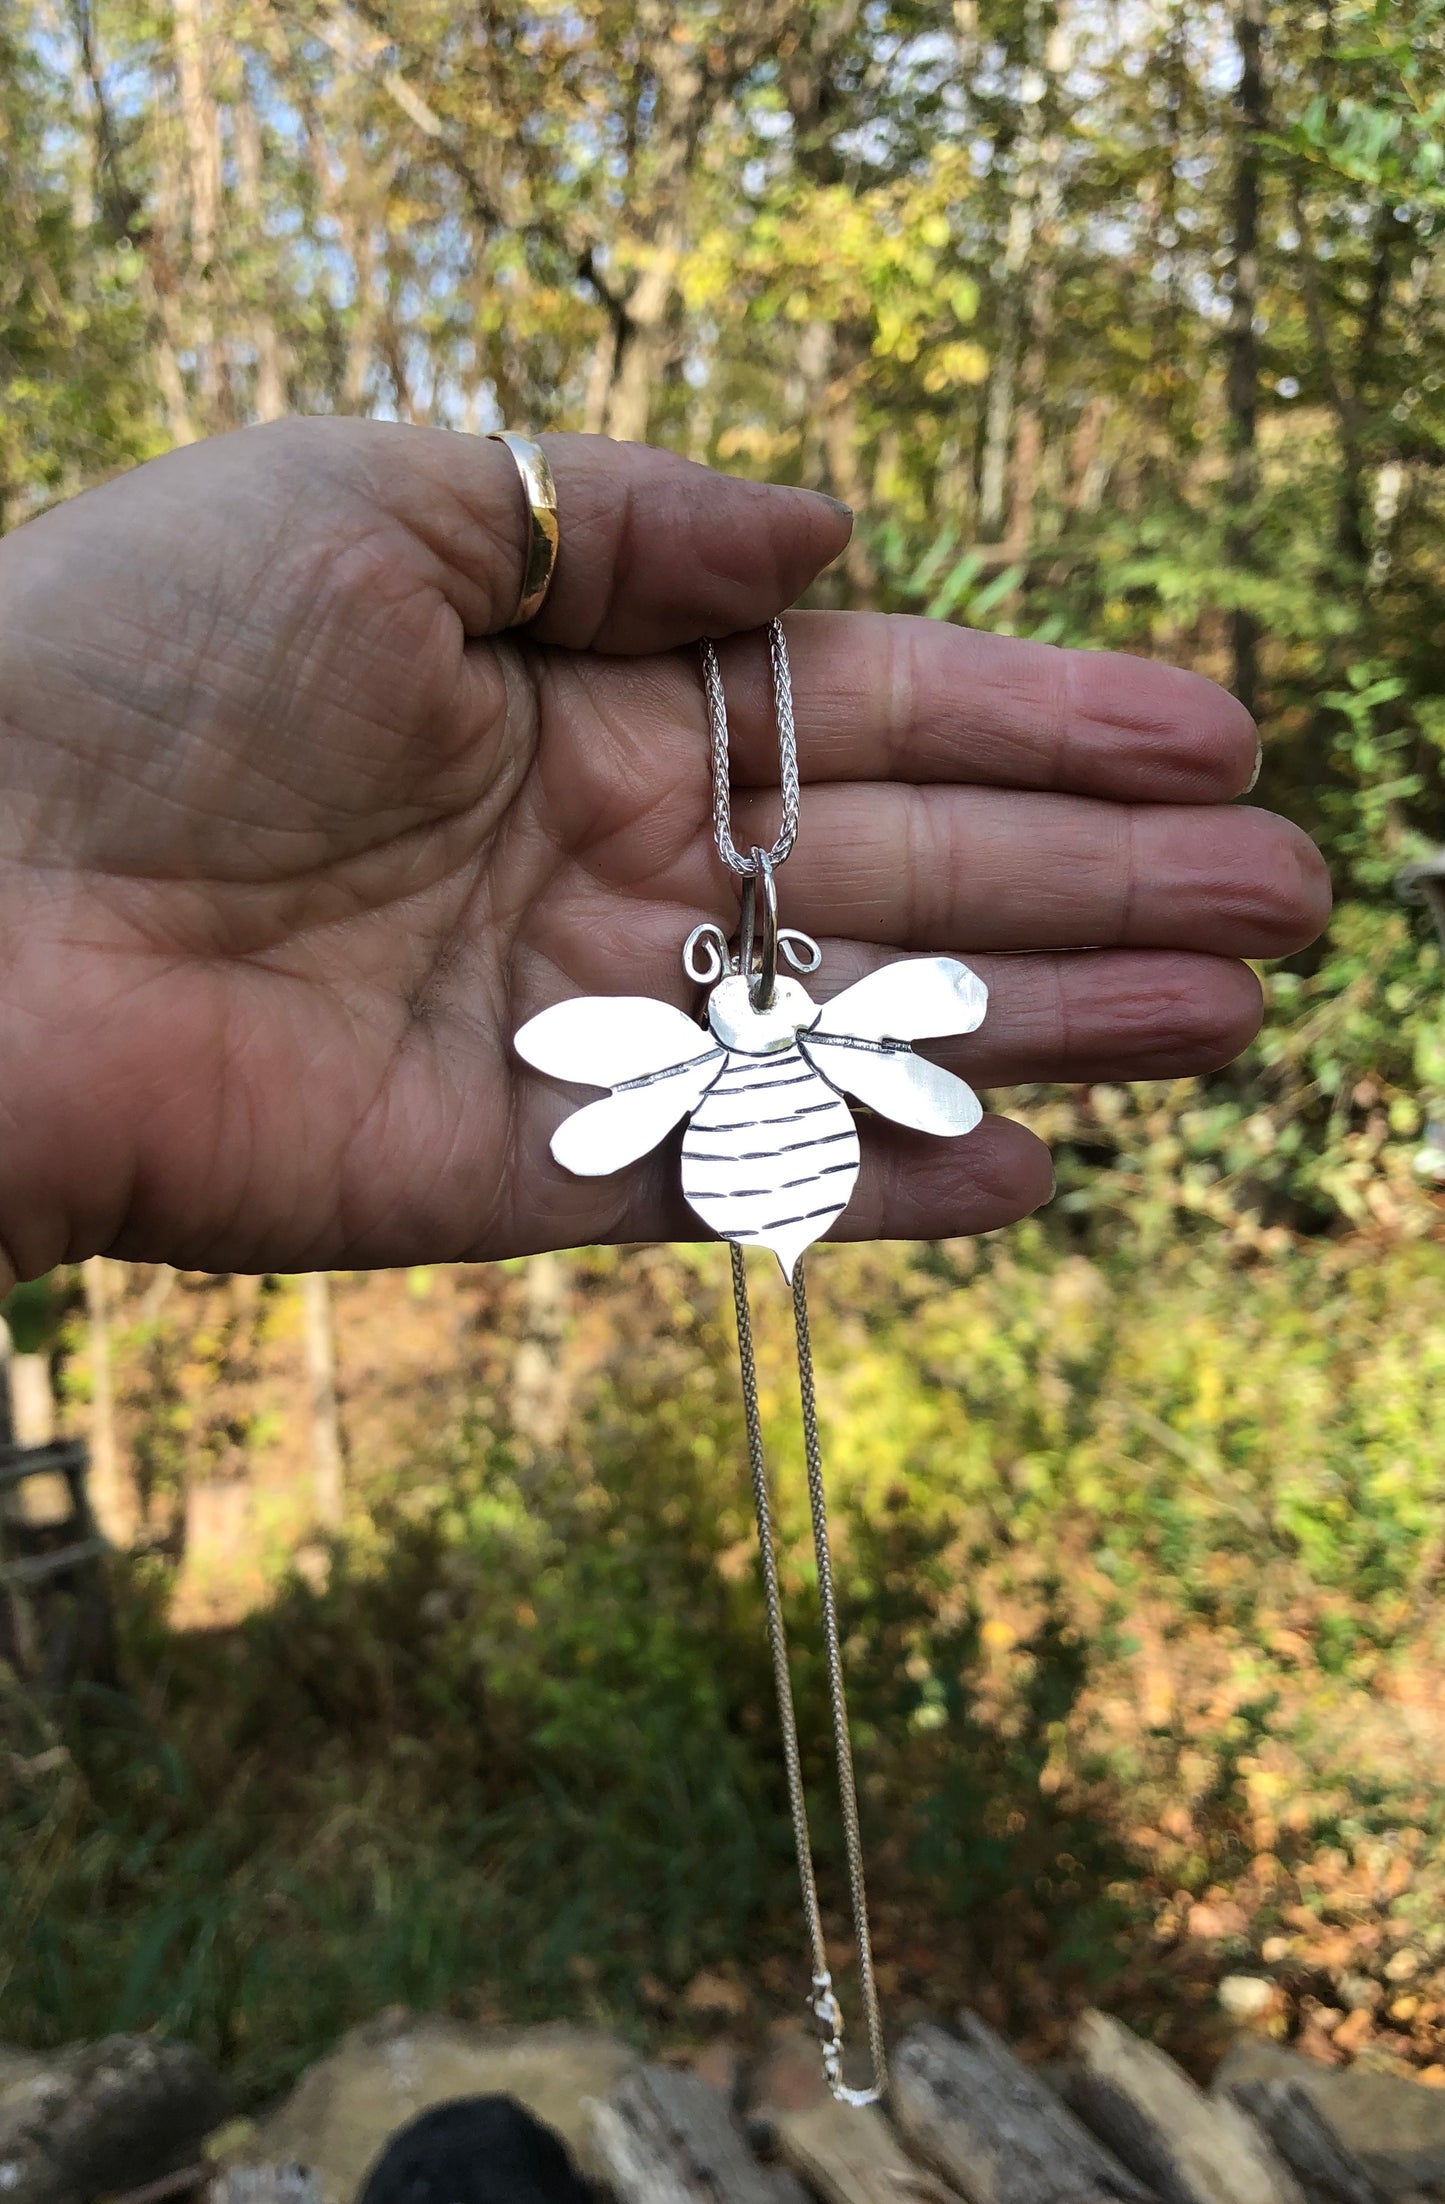 Beatrice the Bumble bee silver necklace - collectionsbytracy.com